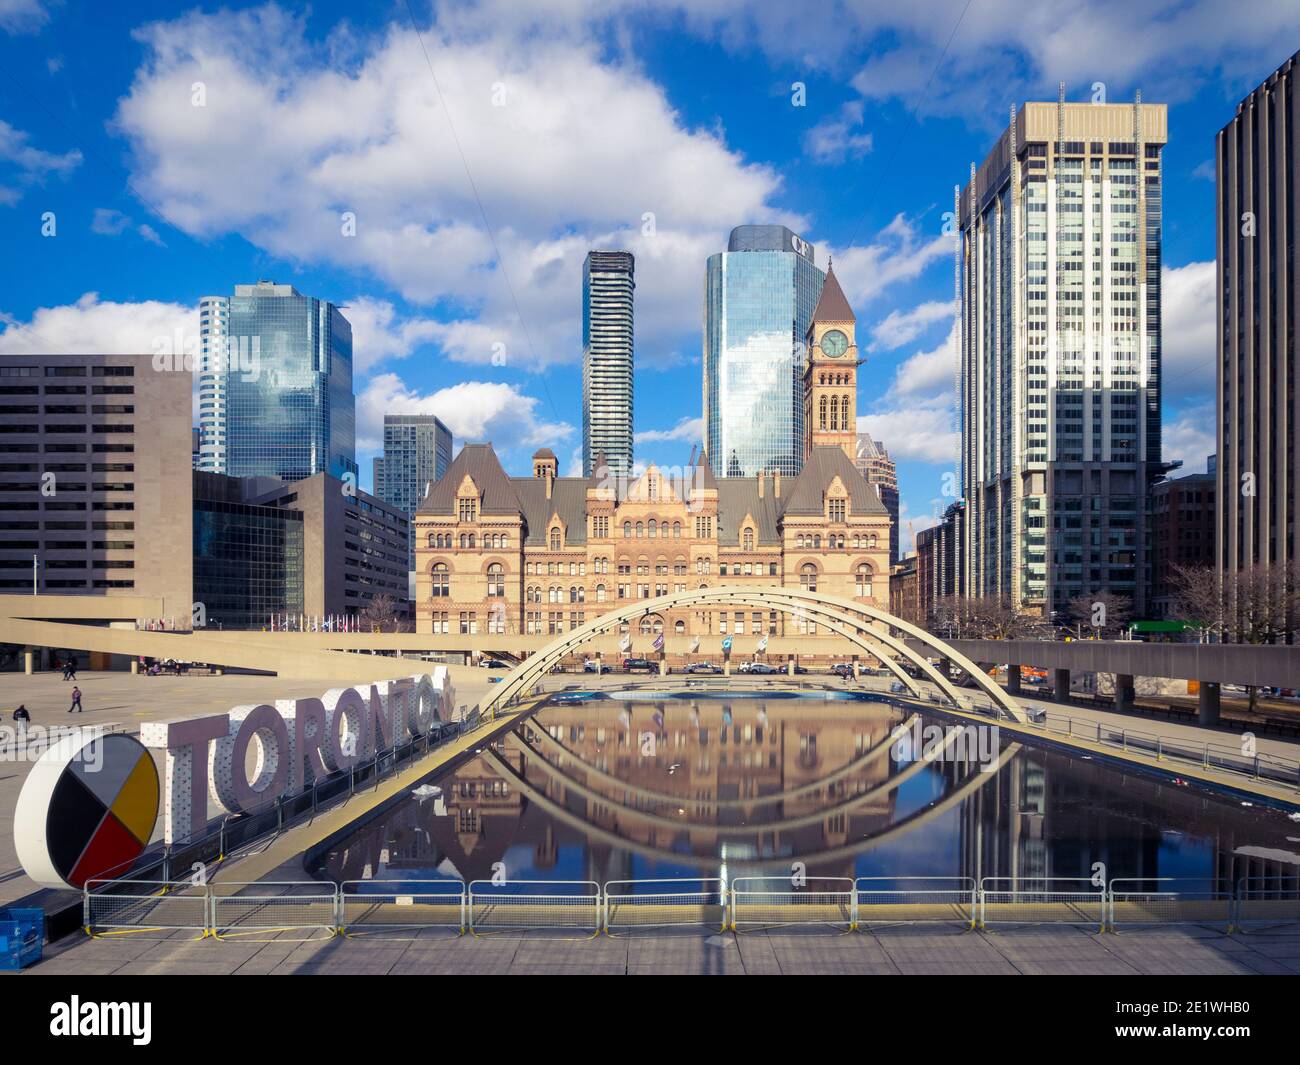 A view of Old City Hall, 3D TORONTO sign, and Nathan Phillips Square in downtown Toronto, Ontario, Canada. Stock Photo